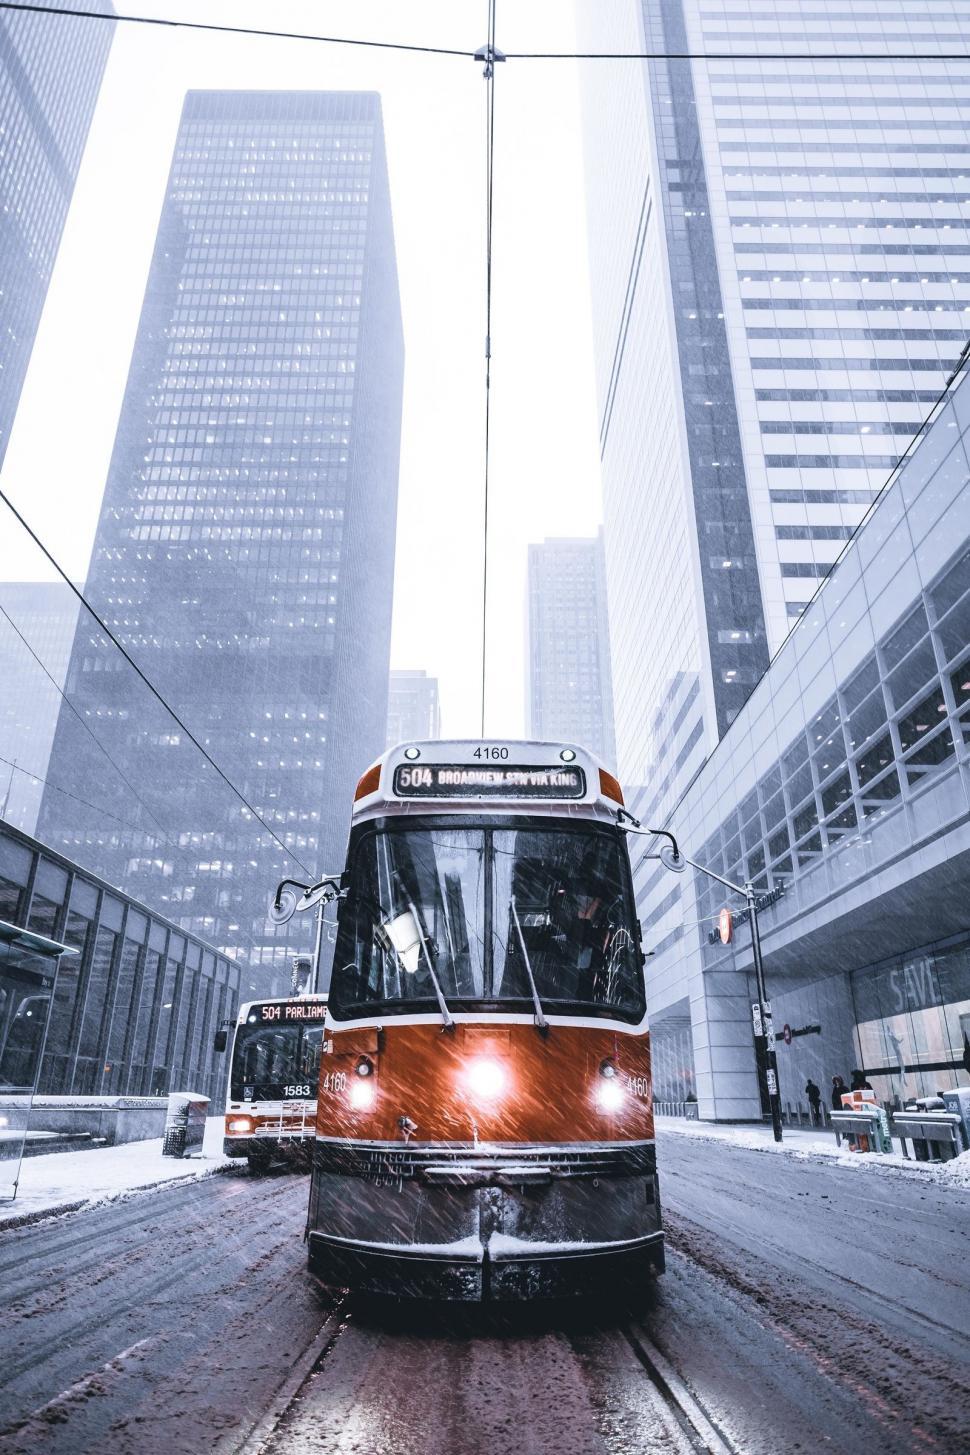 Free Image of Low Angle view of Tram on road with Skyscrapers in snowfall 